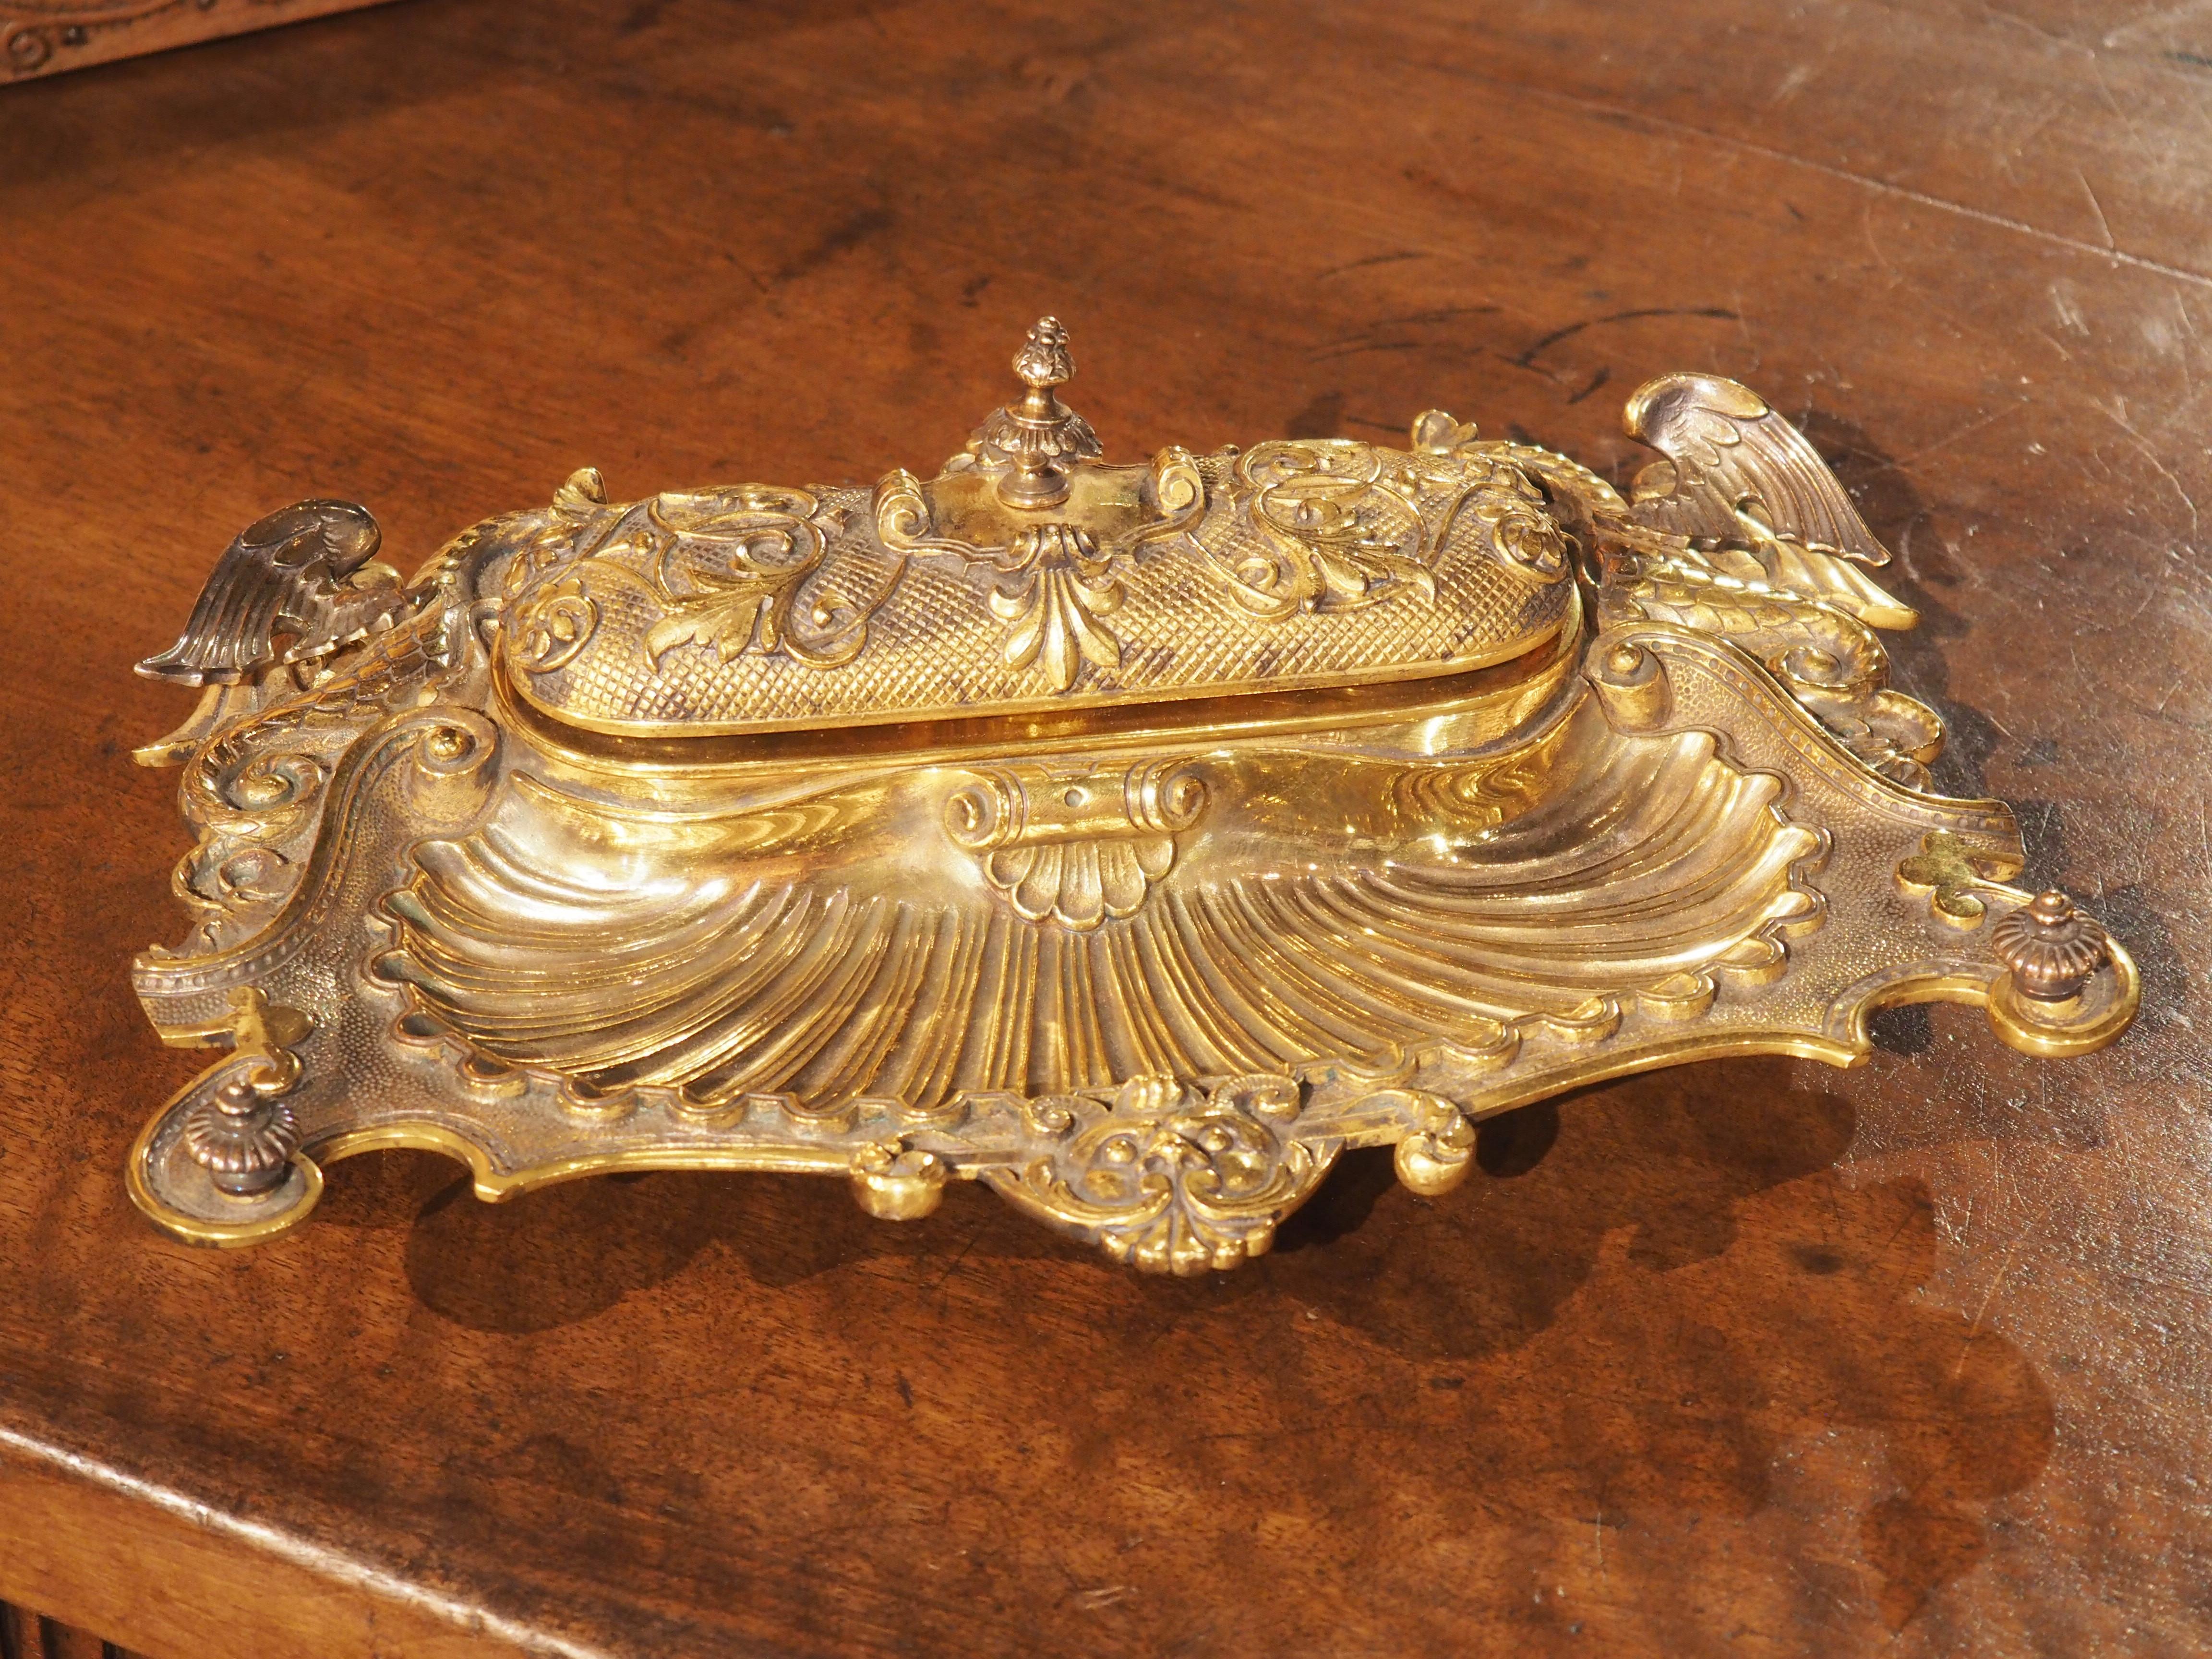 Napoleon III Gilt Bronze Inkwell from France, C. 1840 For Sale 10